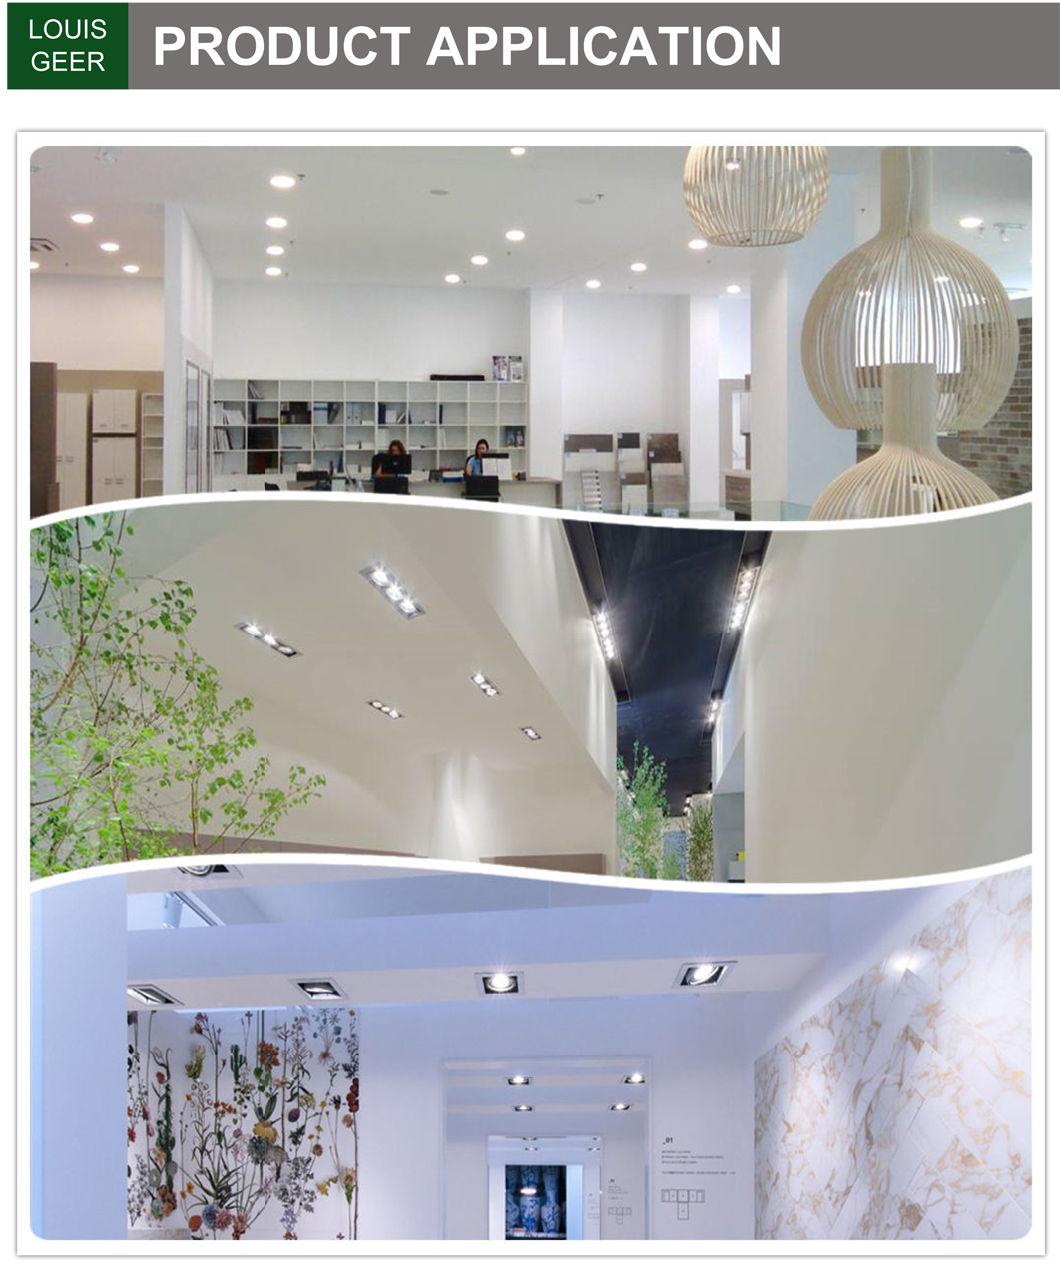 Hot Sales Round Recessed Ceiling LED Down Light 7W 10W 12W 15W 18W 20W 30W LED Spotlight LED Down Light